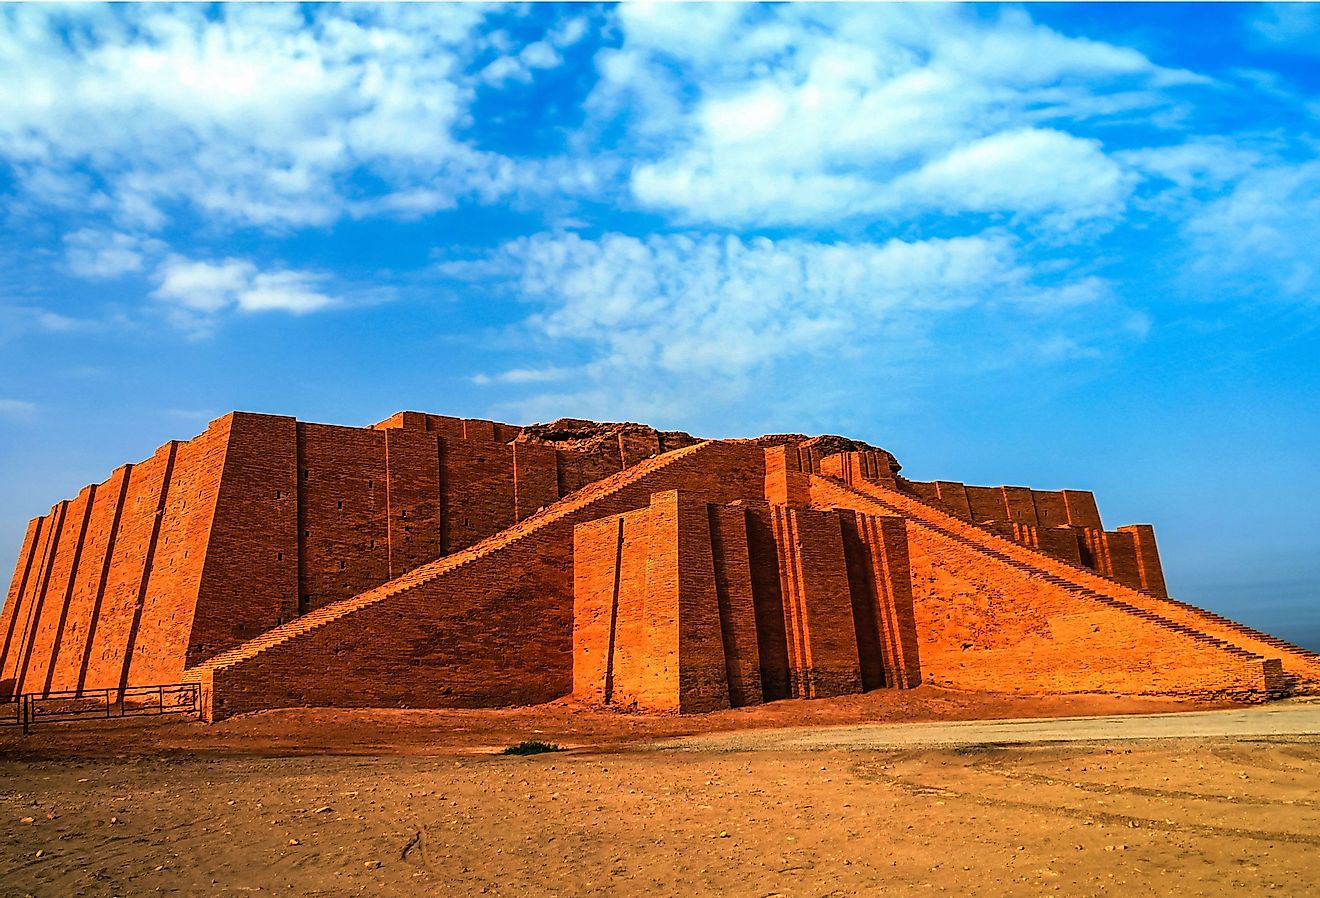 Many Sumerian cities were dominated by these large religious and political buildings called Ziggurats. Image credit Bildagentur Zoonar GmbH via Shutterstock